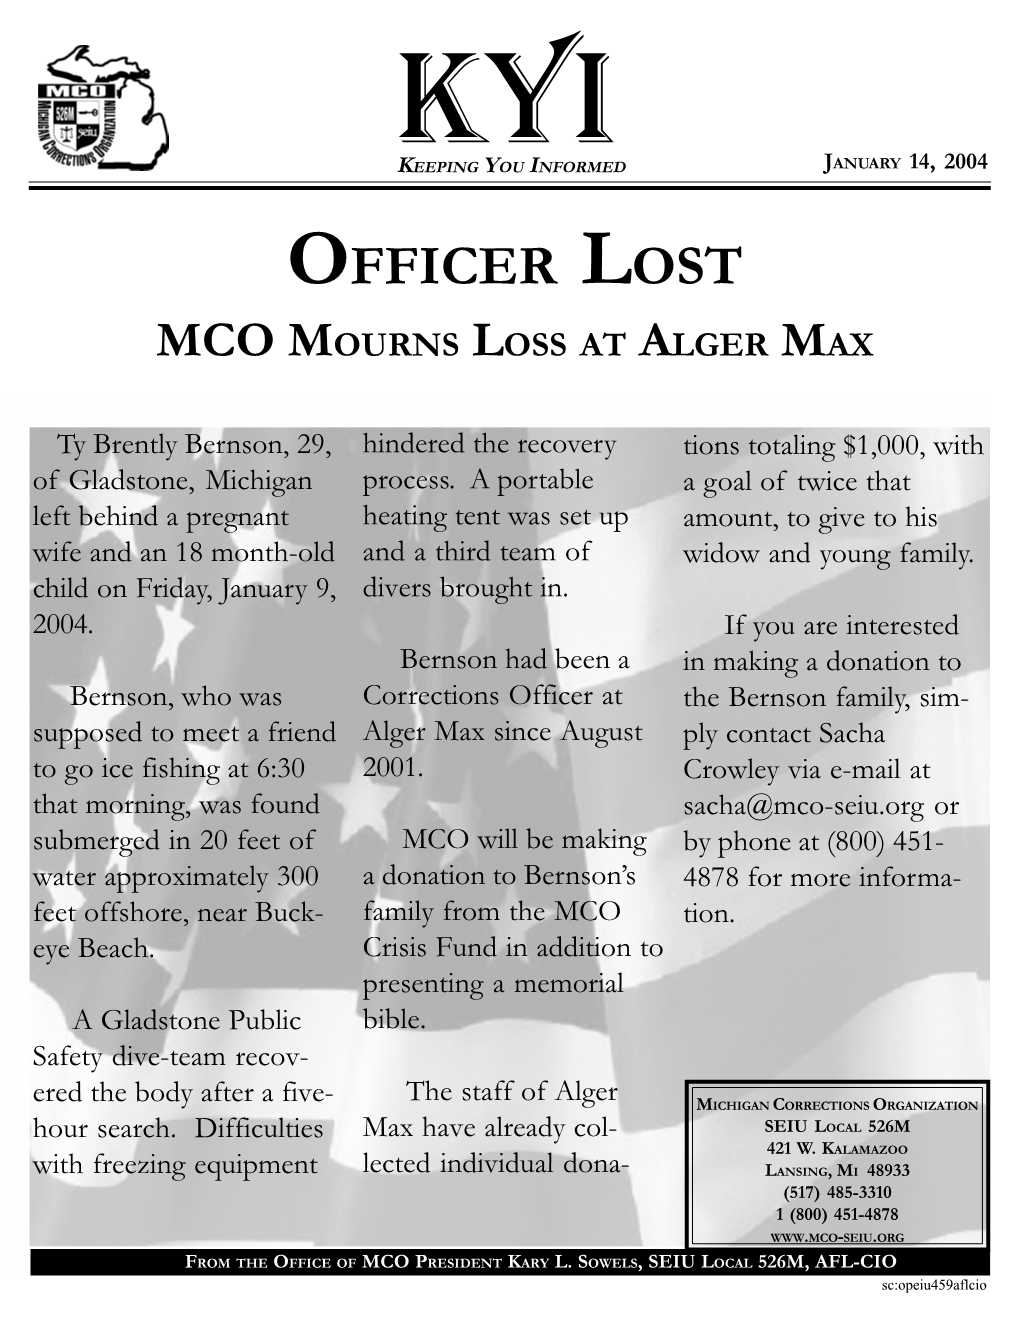 Officer Lost Mco Mourns Loss at Alger Max